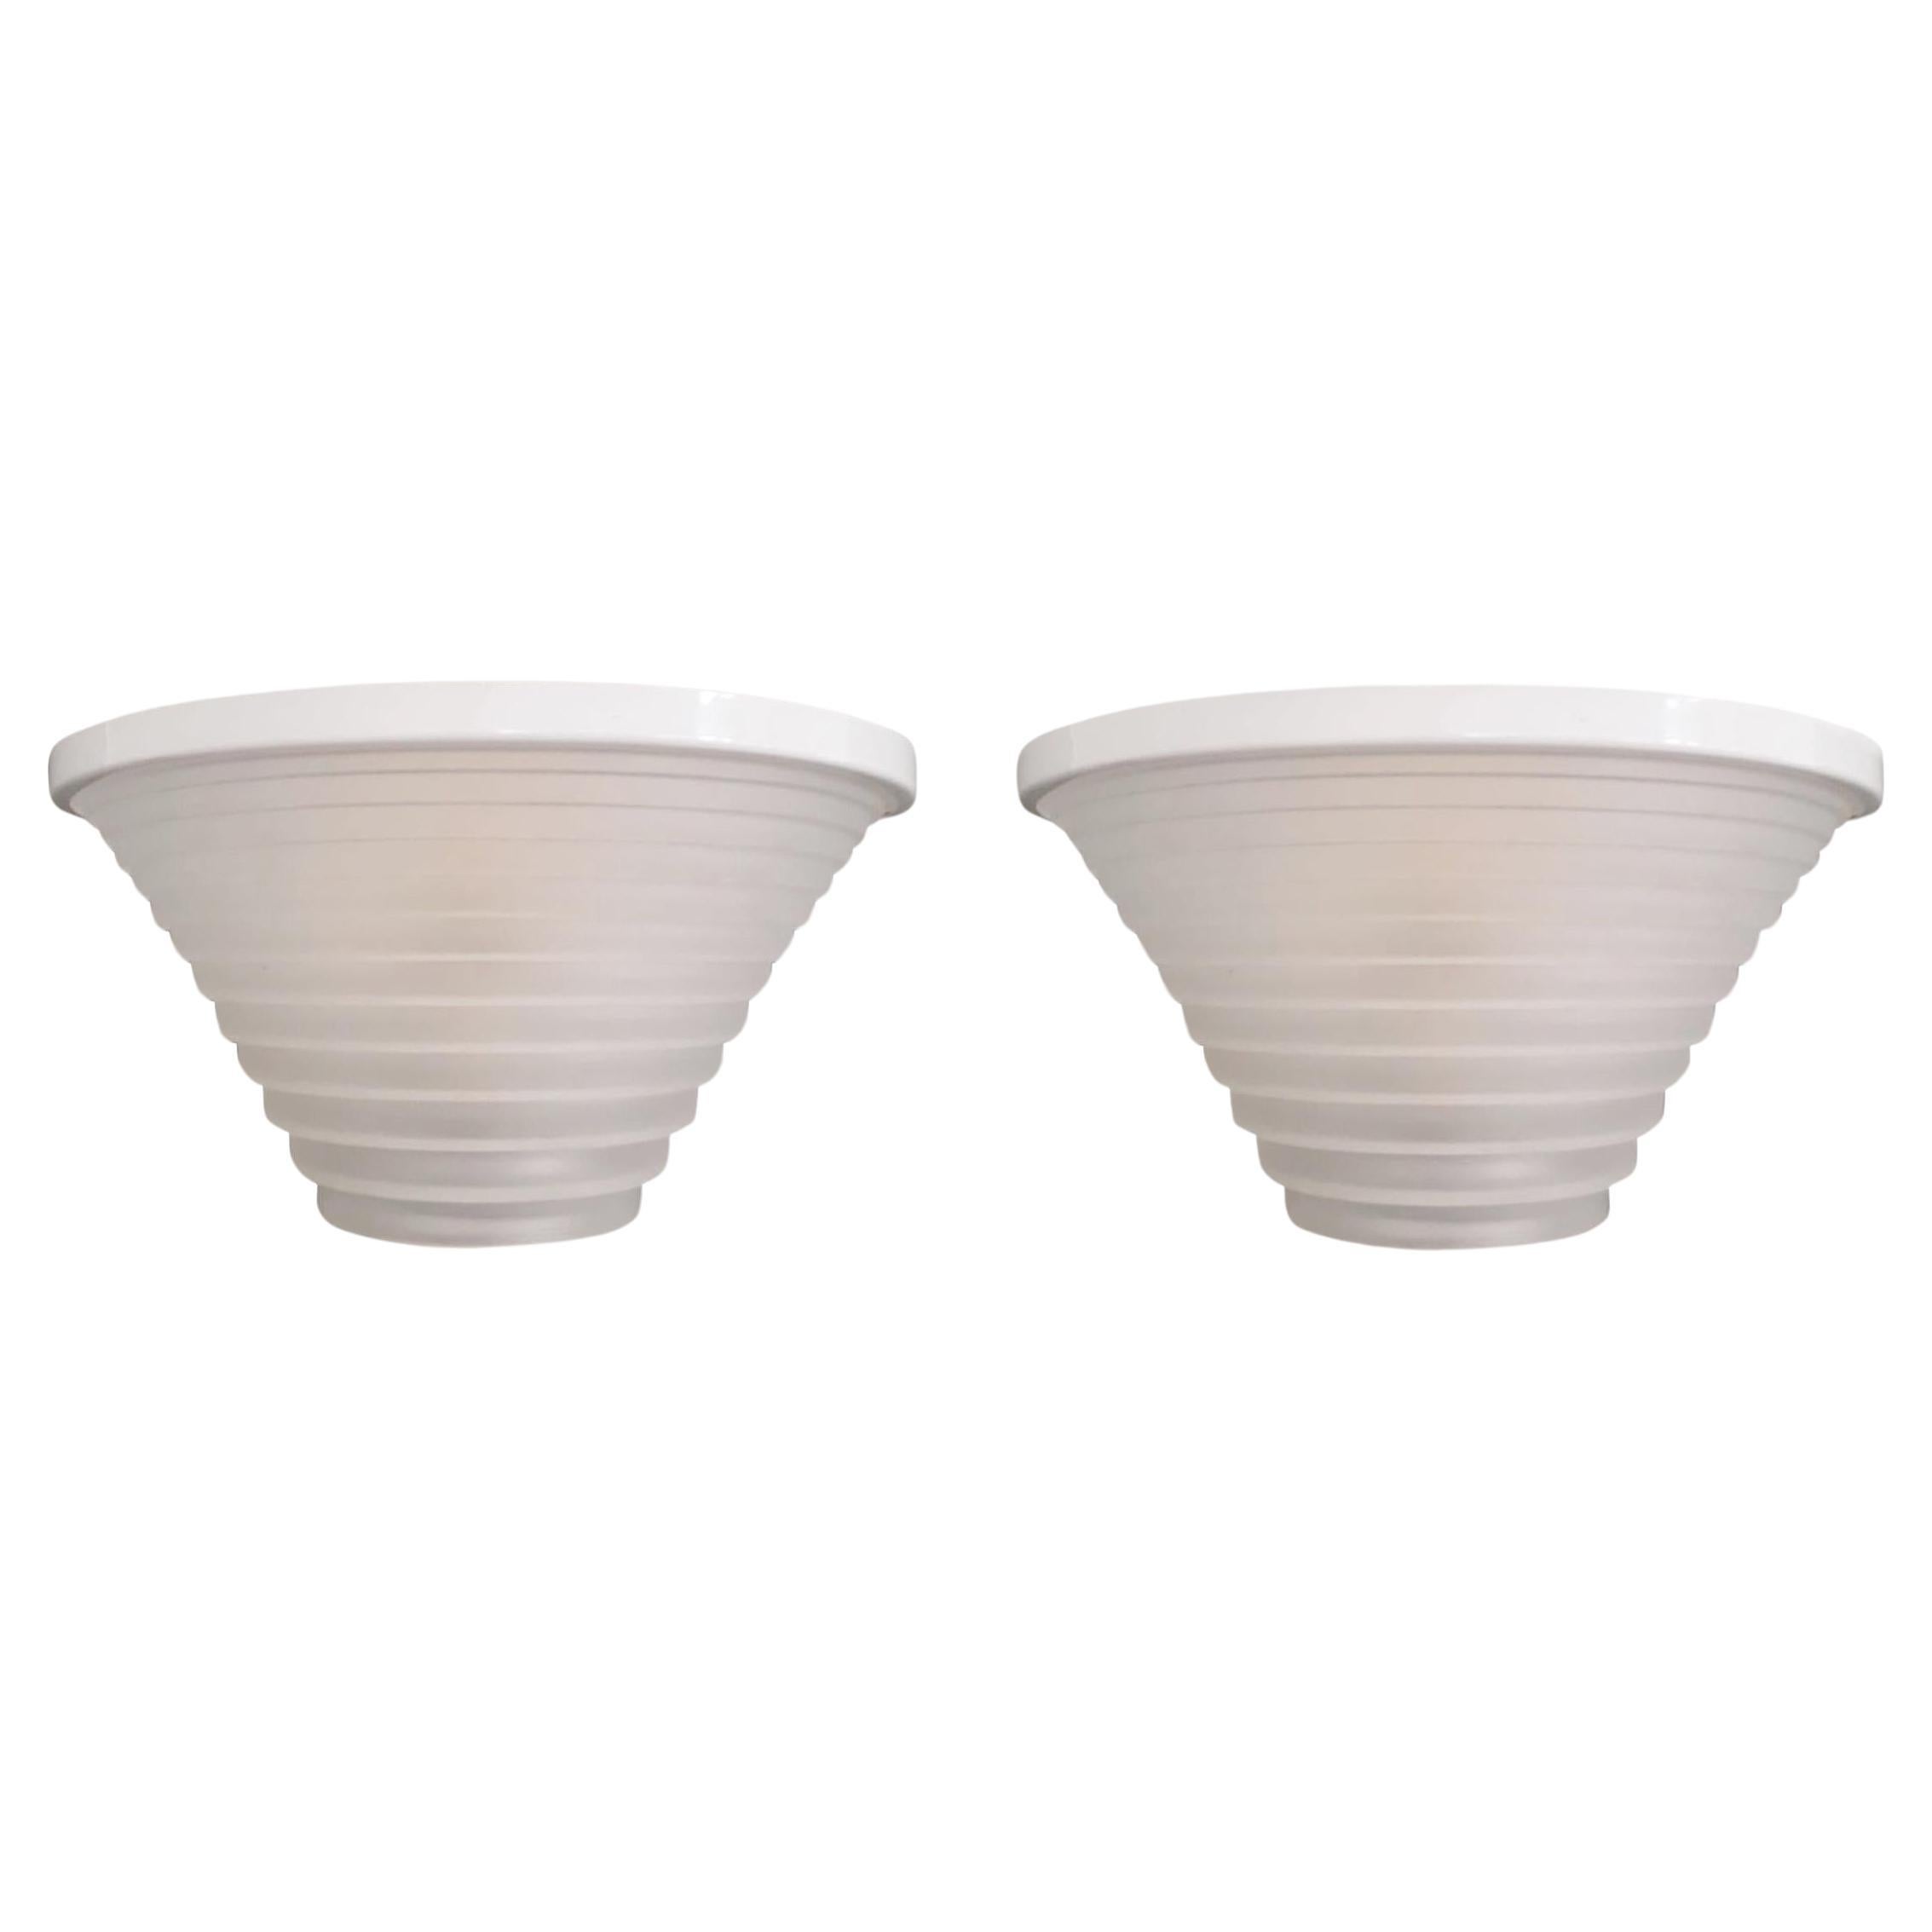 Pair of Egisto 28 Sconces by Artemide - 5 Pairs Available